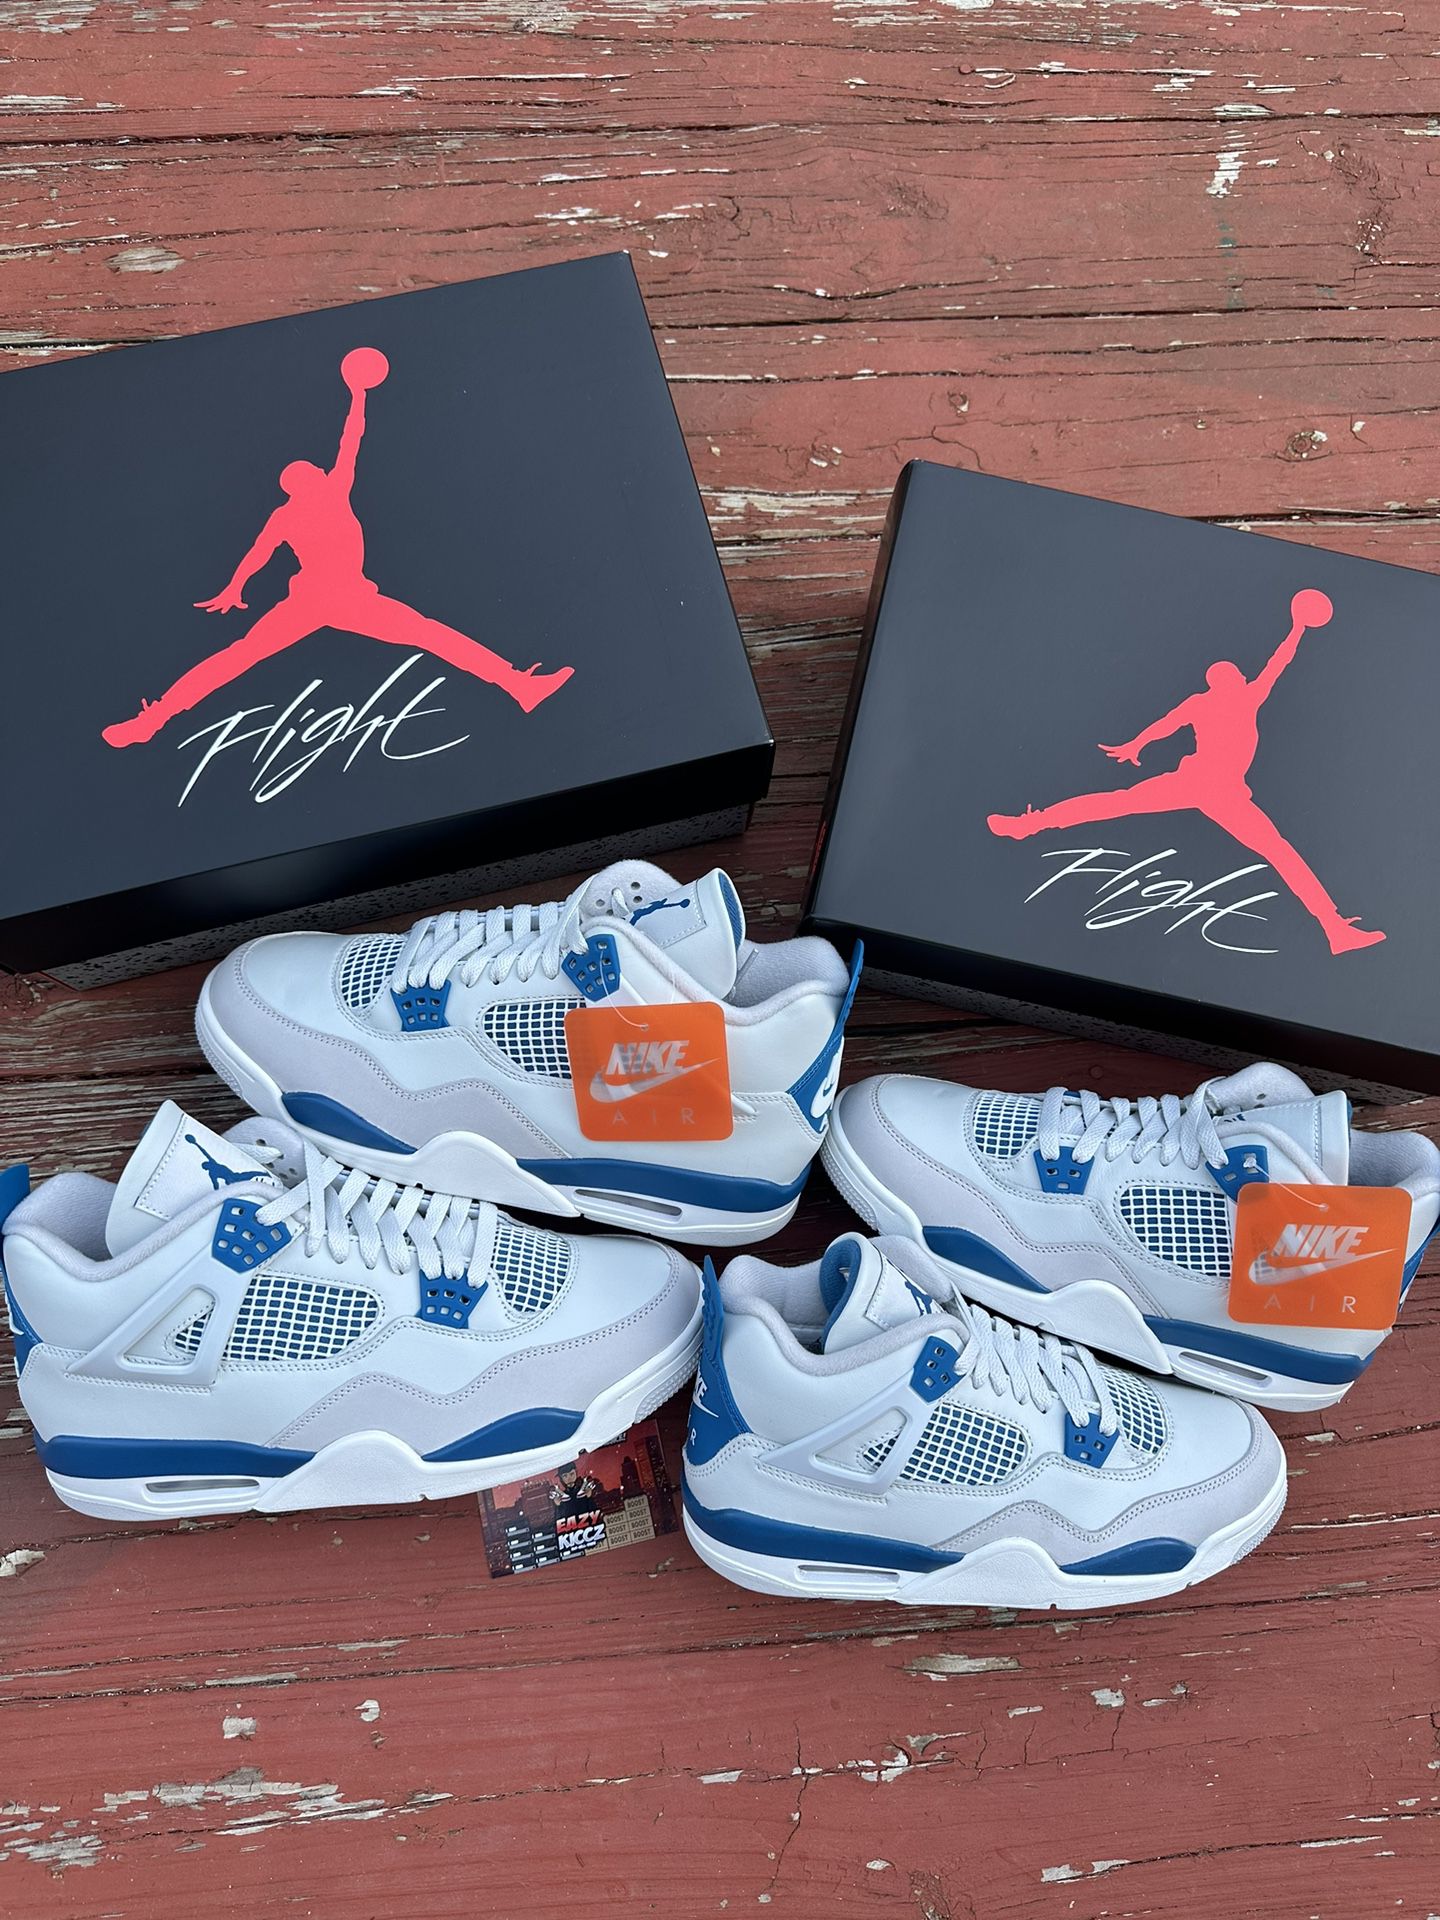 Air Jordan 4 “Military Blue” Mens 7.5-13 & GS 4-7 Available Brand New 100% Authentic Guaranteed 